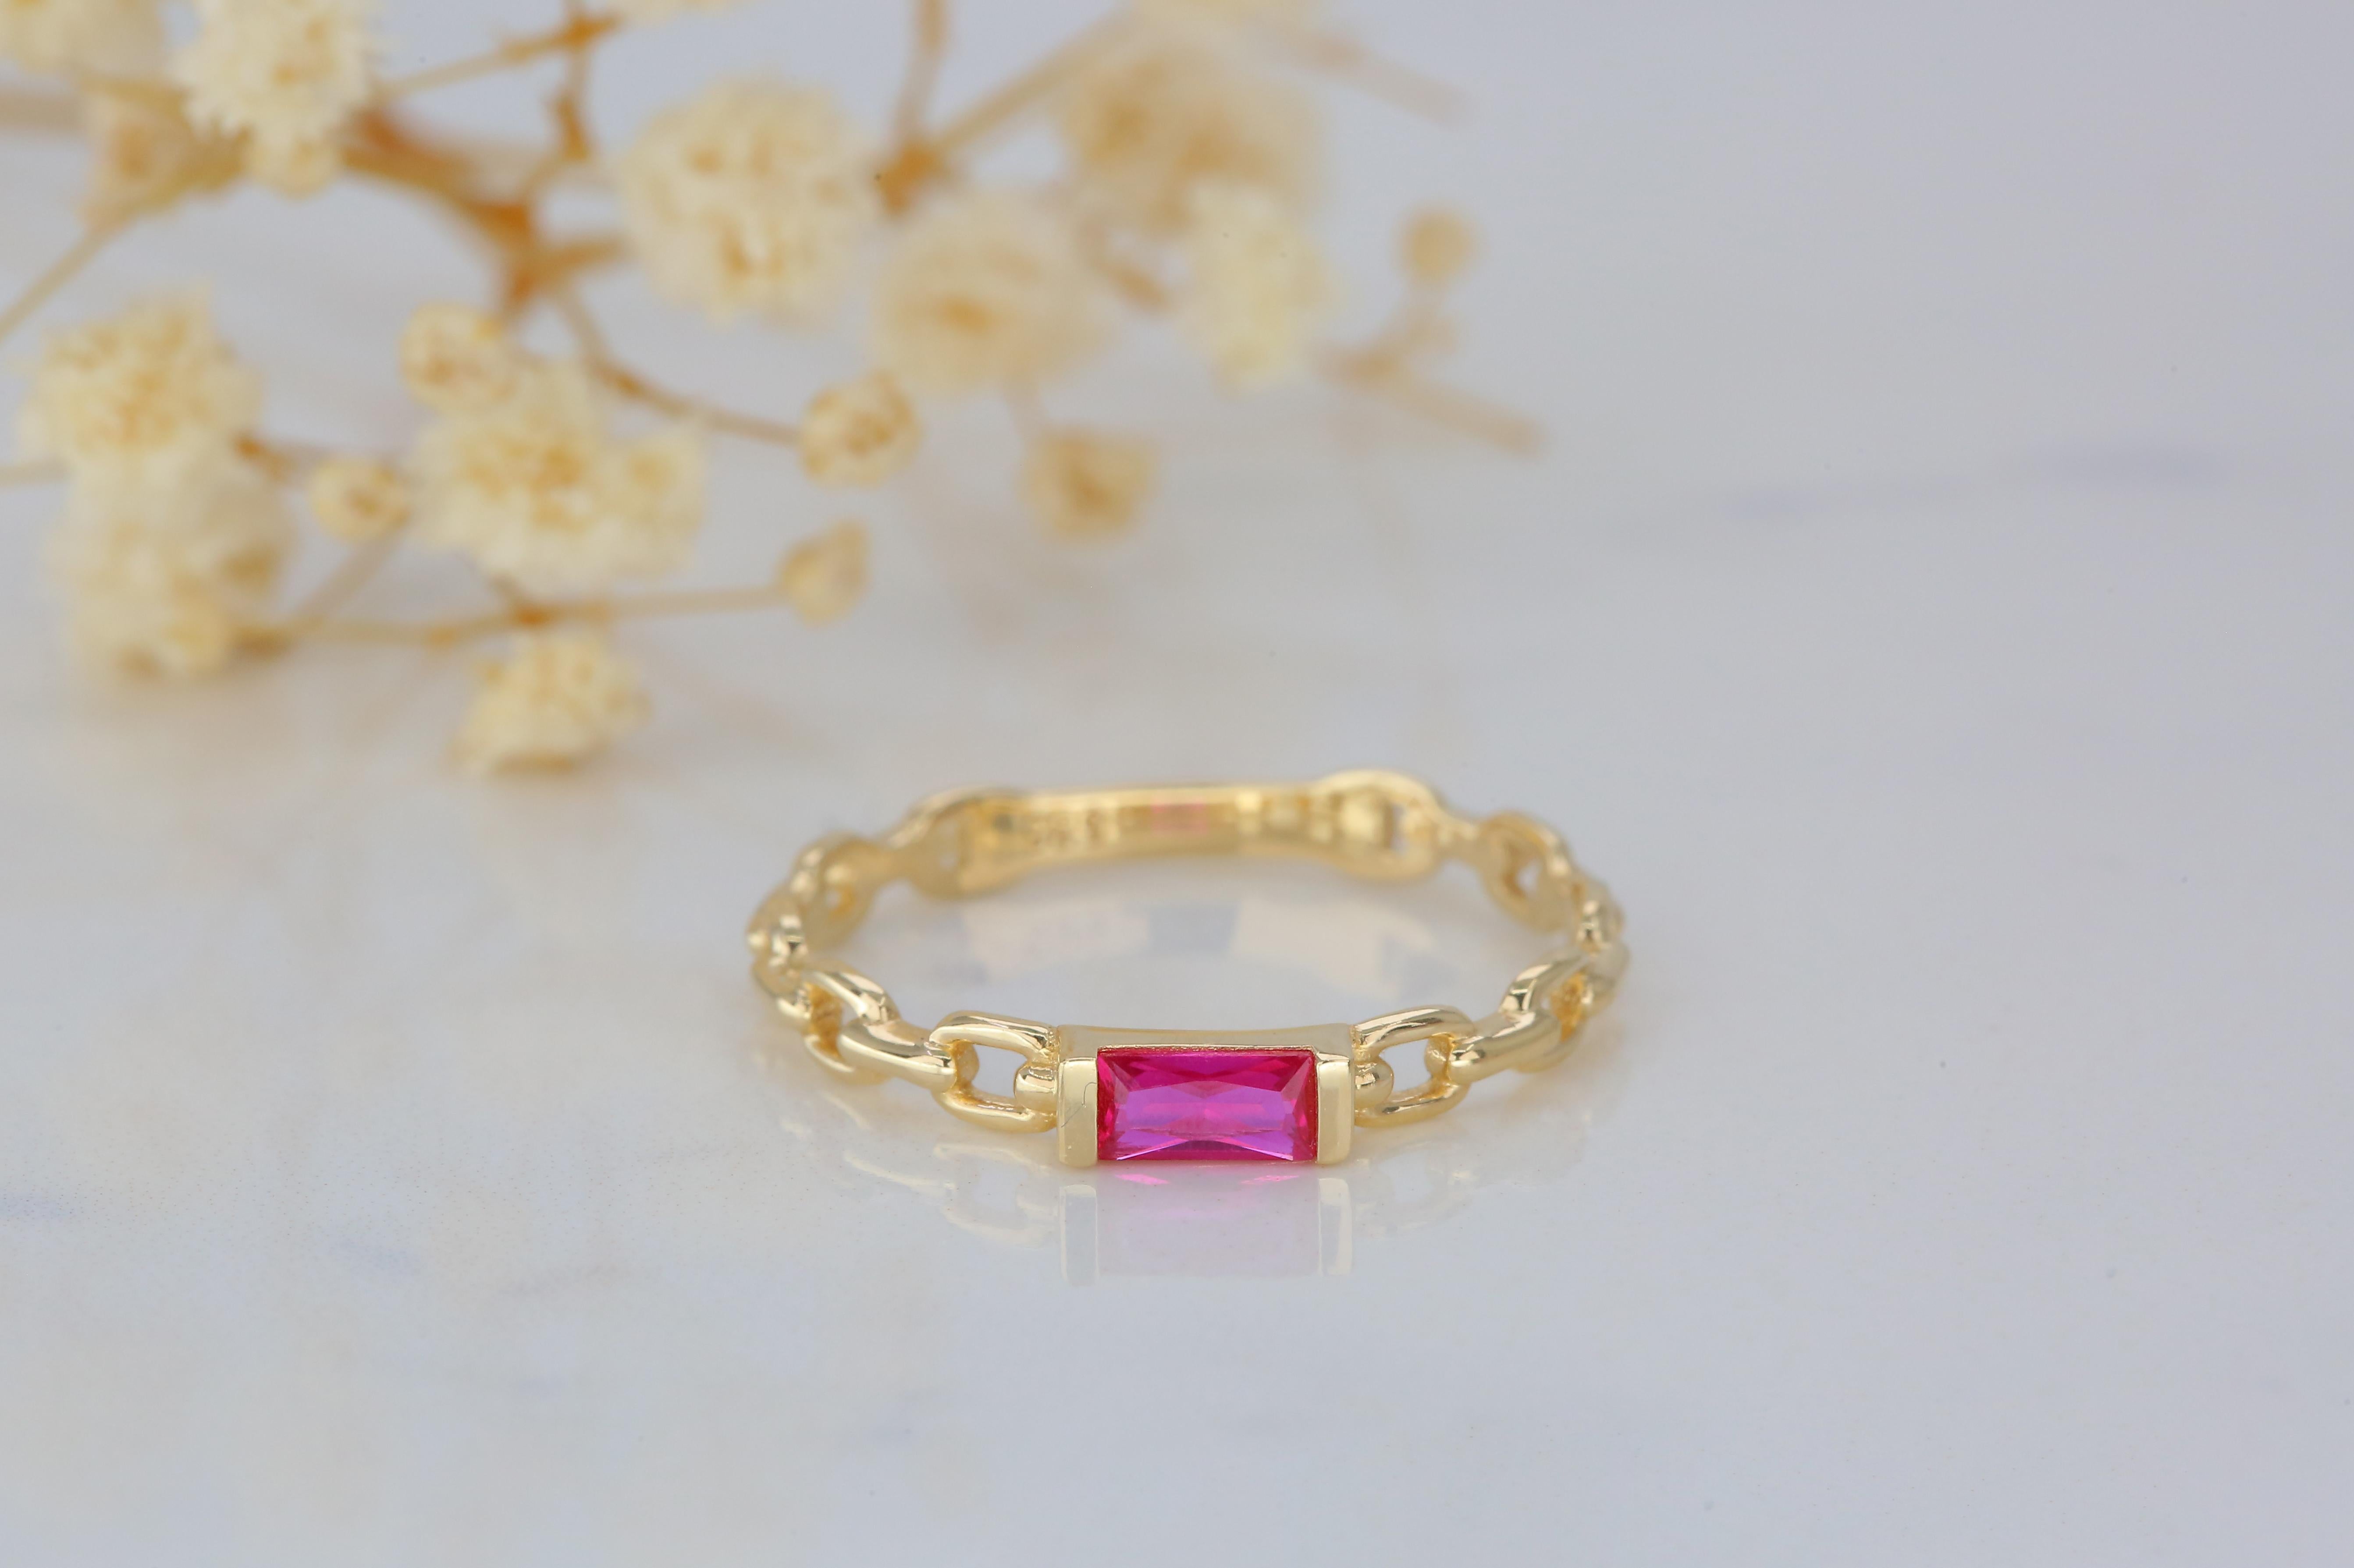 For Sale:  14 K Solid Gold Chain Link Ring -with Pink Quartz, Modern Minimal Ring 3